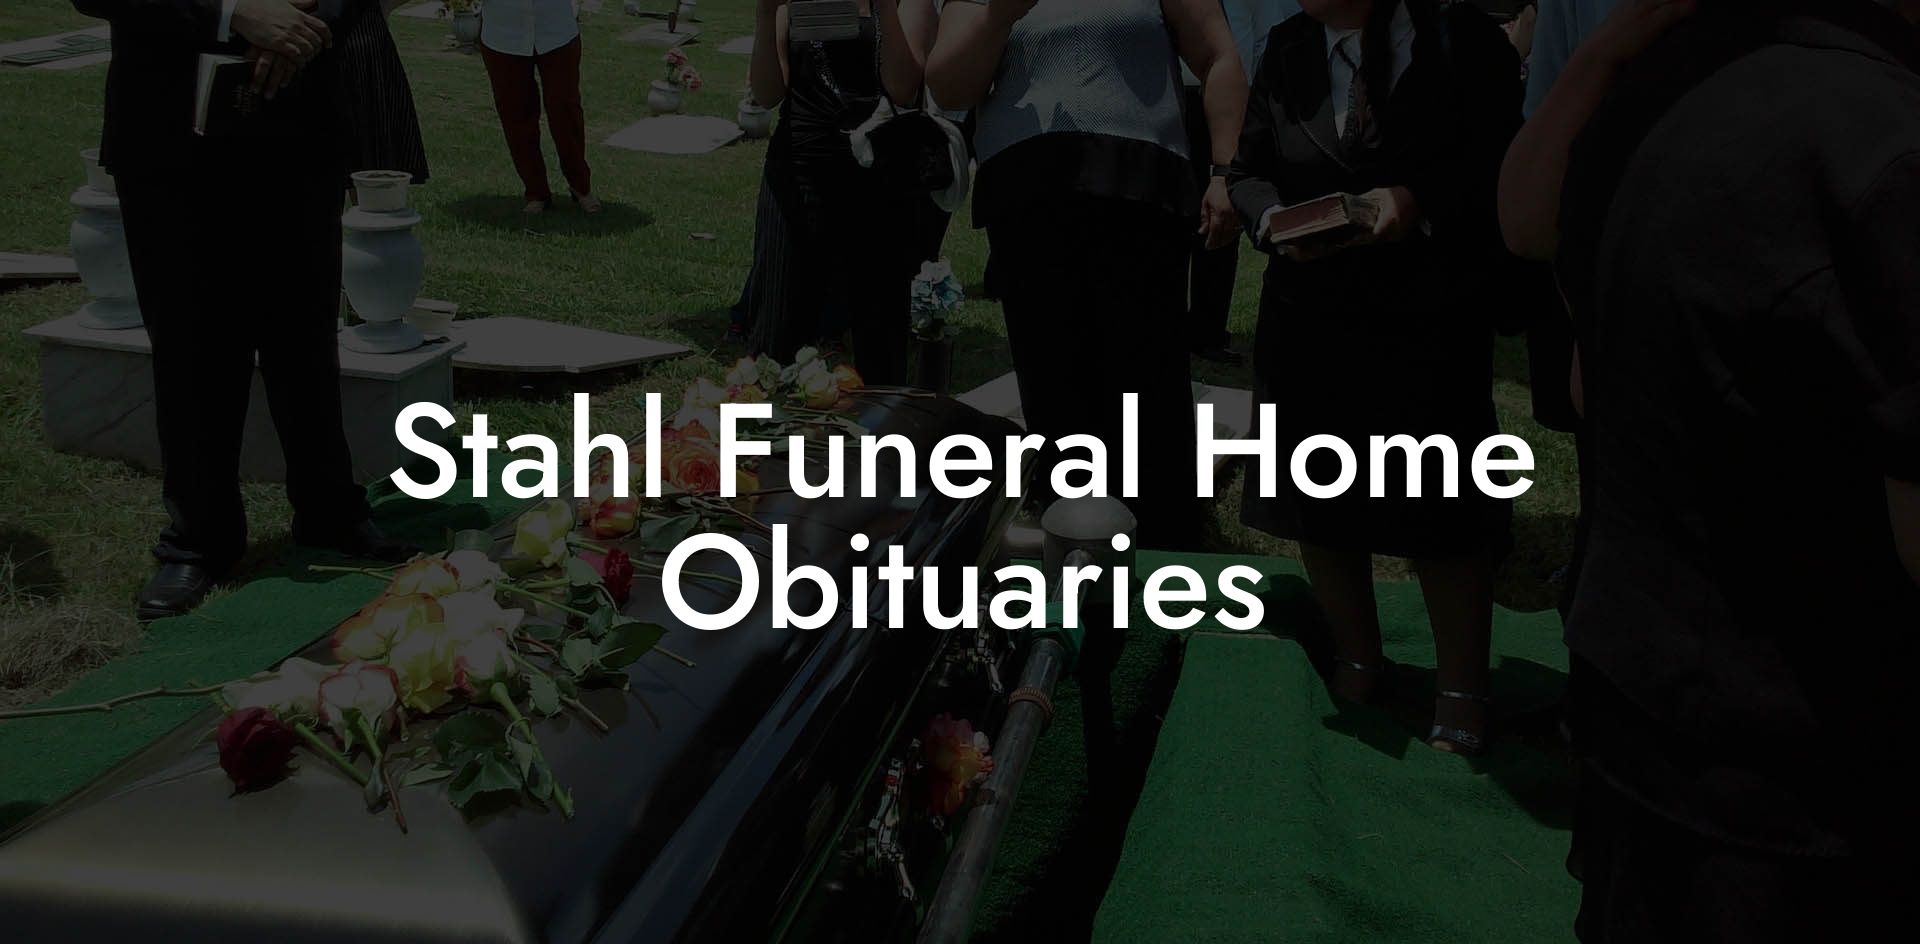 Stahl Funeral Home Obituaries